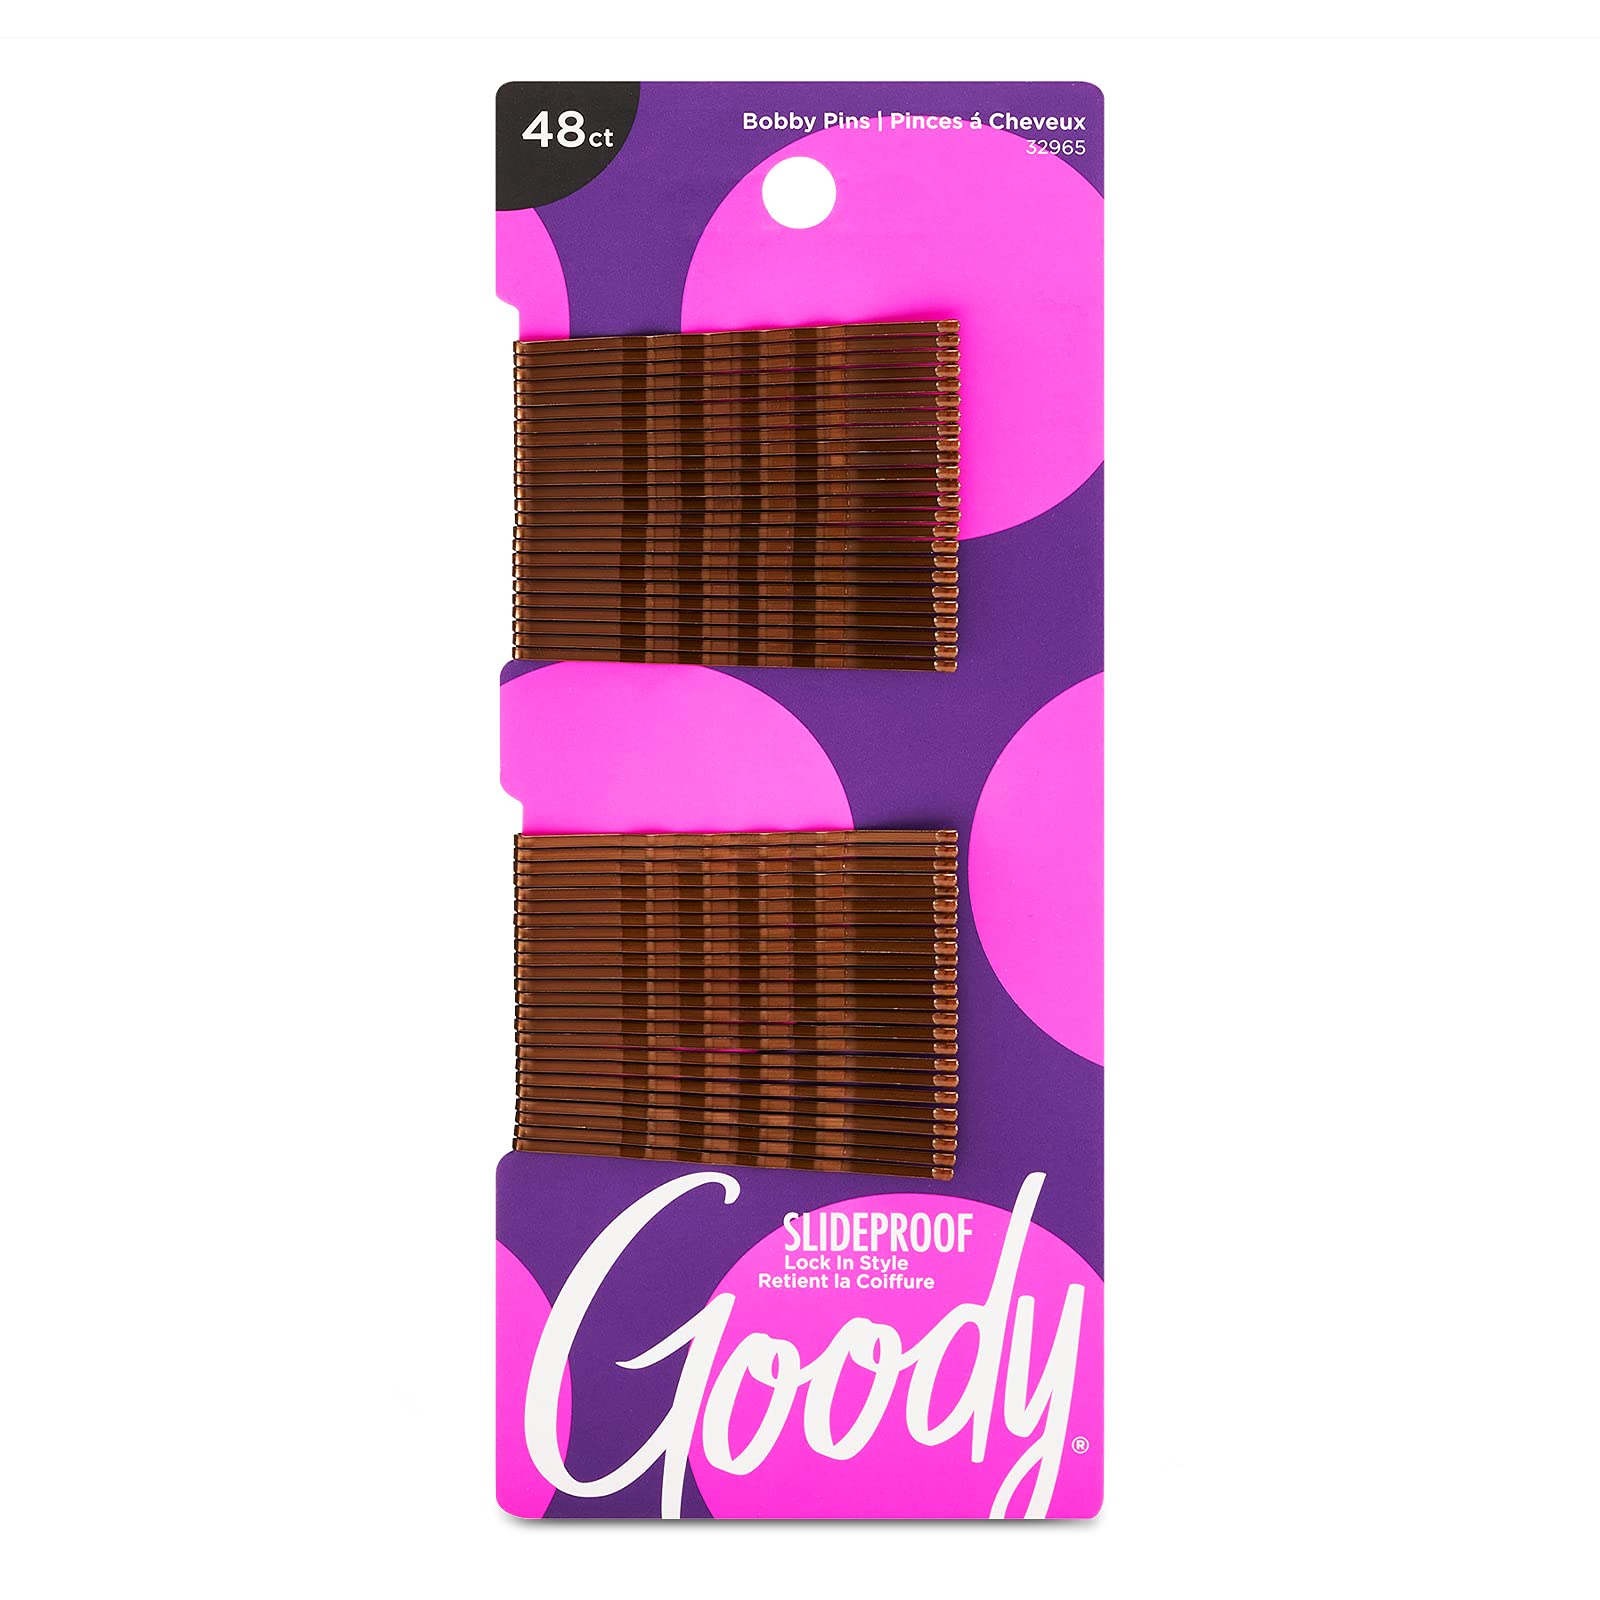 Goody Slideproof Womens Bobby Pin-48 Count, Brown - 2 Inch Pins Help Keep Hairs In Place-Hair Accessories to Style With Ease and Keep Your Hair Secured-For All Hair Types-Pain Free(Pack of 1)